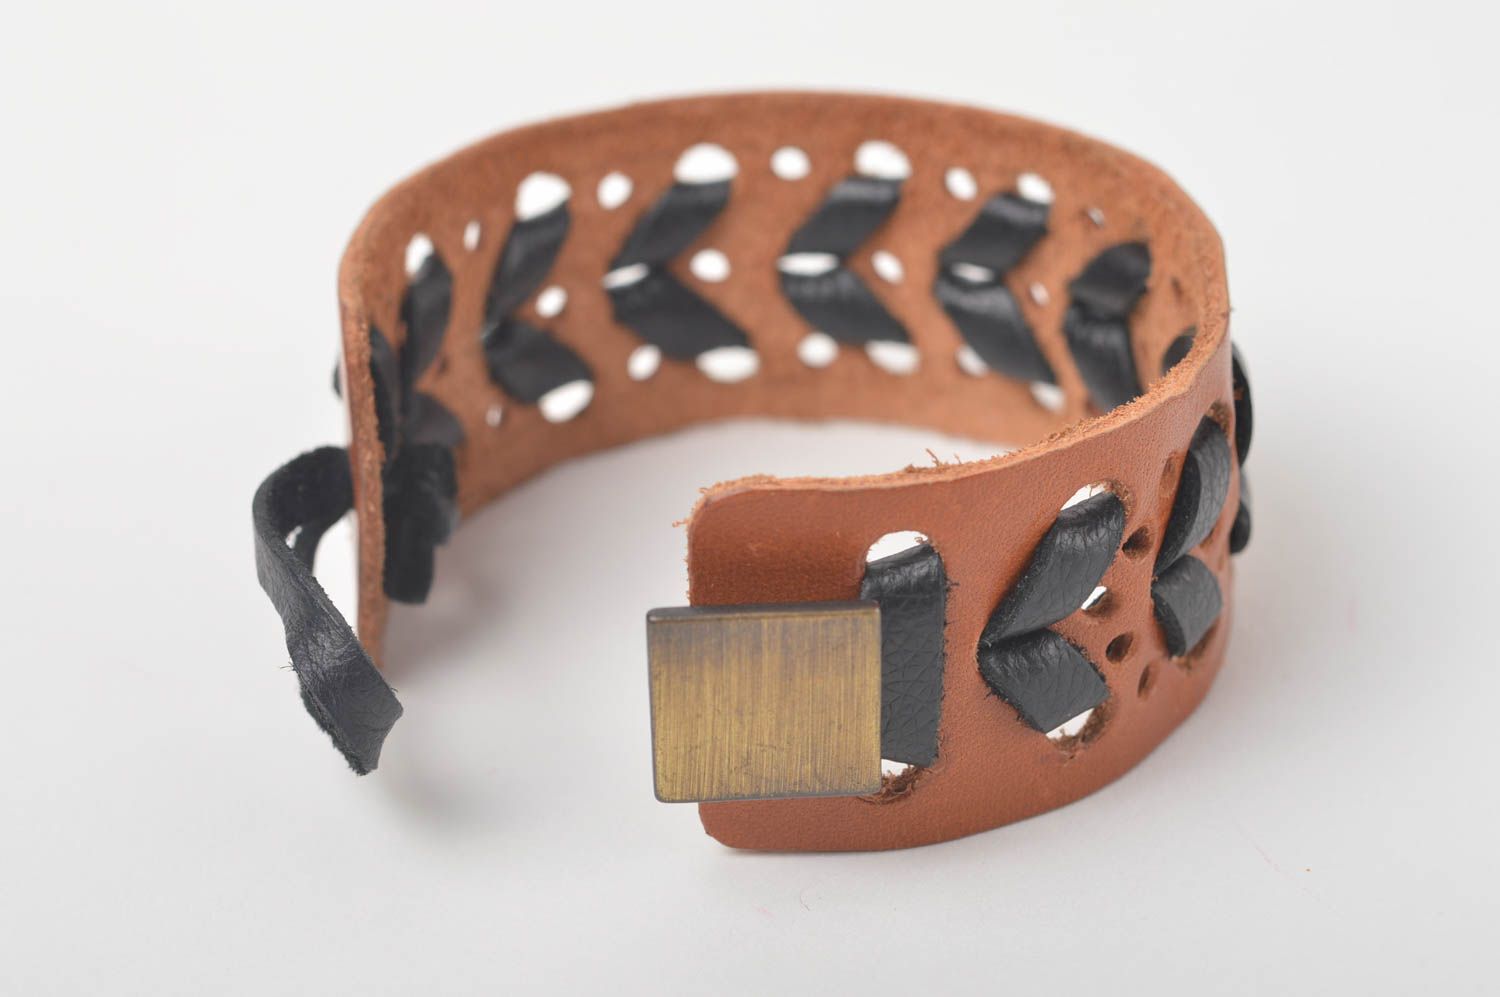 Beautiful handmade leather bracelet designs cool jewelry designs gifts for her photo 3